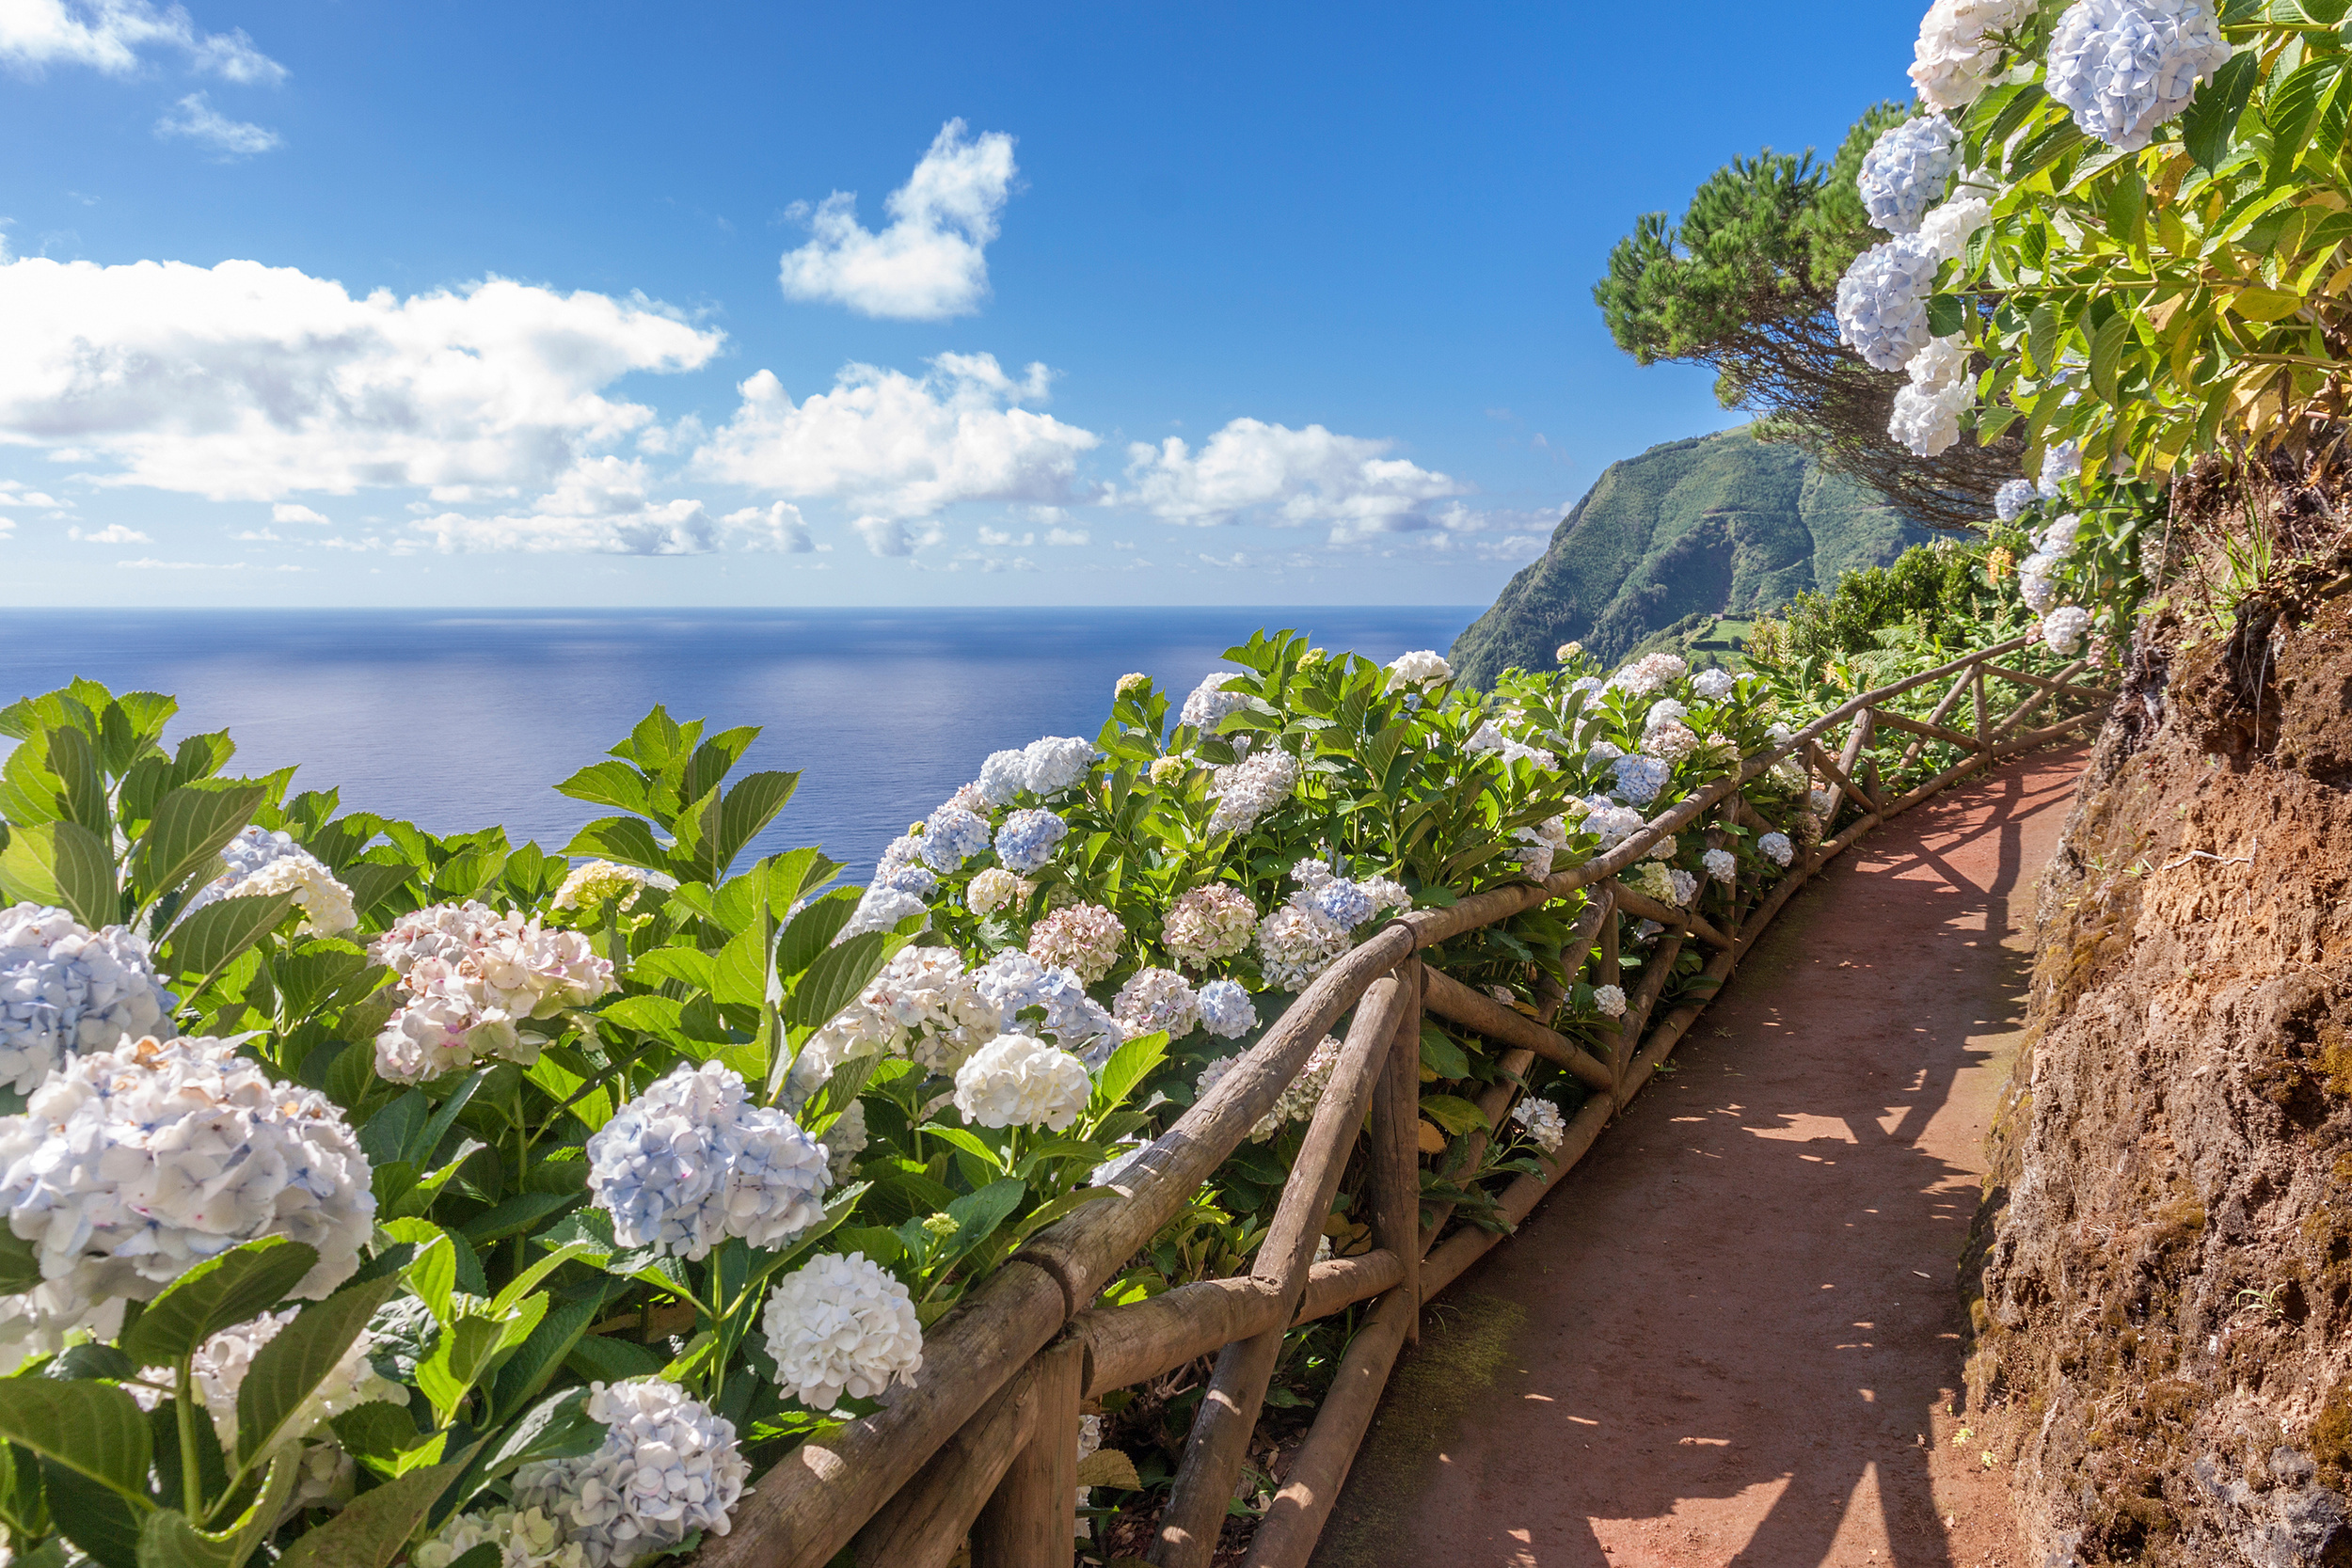 <p>The Azores grow in popularity every year for good reason. This part of Portugal is truly stunning. However, if you visit during shoulder season, spring, you will be rewarded by fewer crowds and see the region’s hydrangeas in full bloom.</p><p>You may also like: <a href='https://www.yardbarker.com/lifestyle/articles/20_tips_that_will_keep_your_chicken_moist_on_the_grill/s1__24181486'>20 tips that will keep your chicken moist on the grill</a></p>